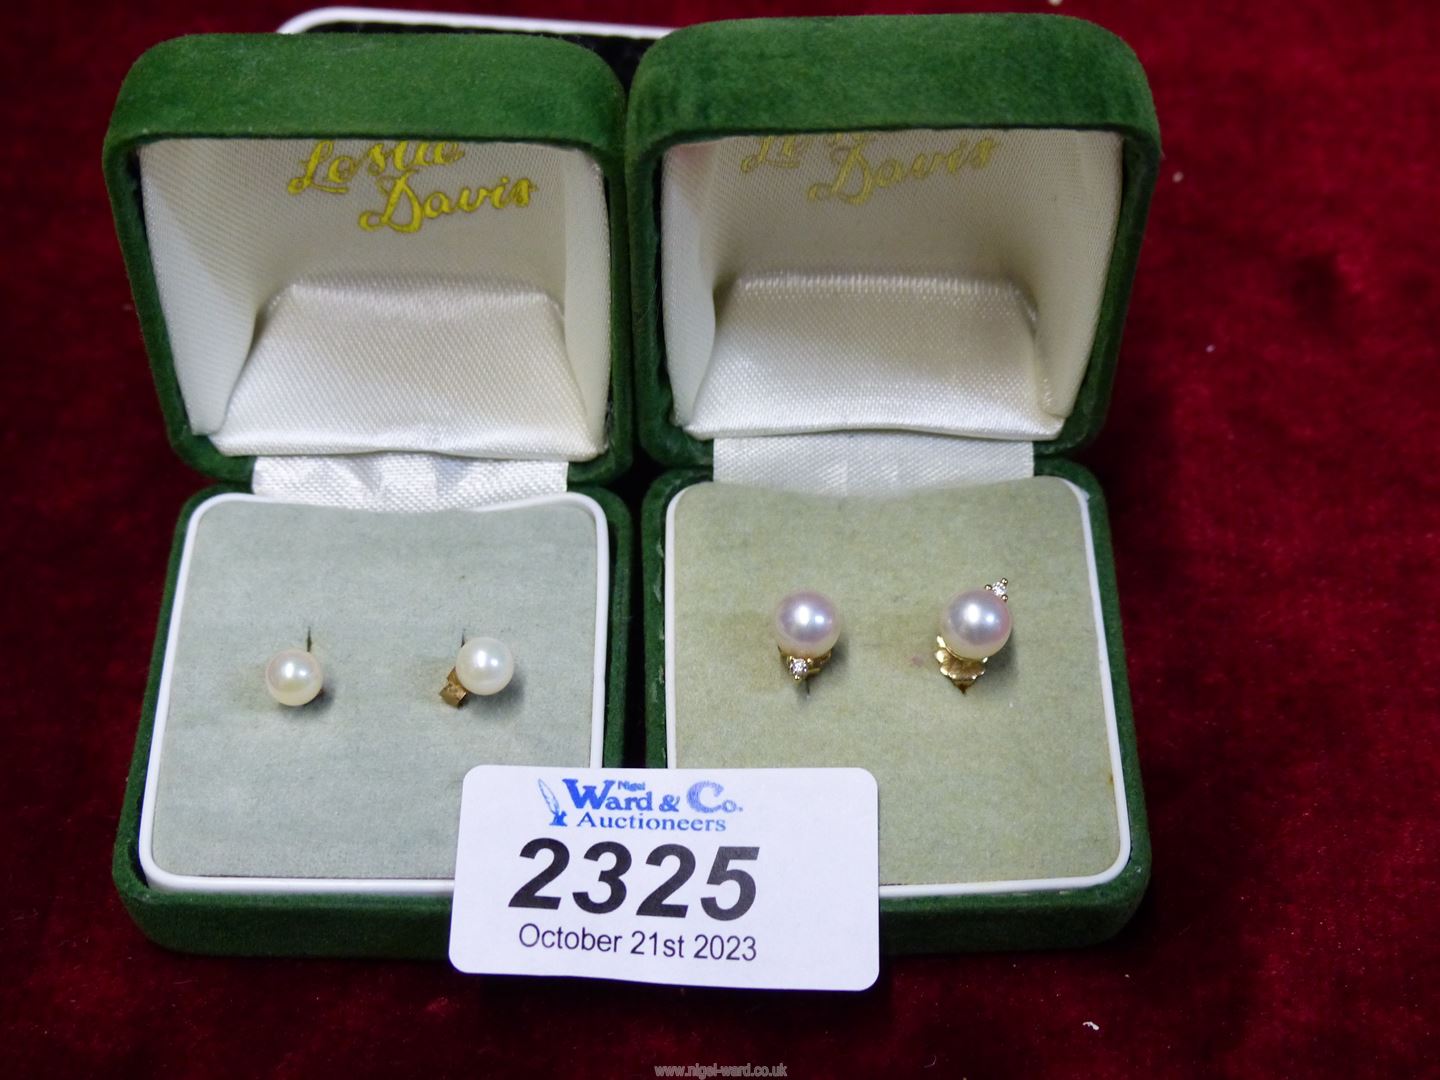 A pair of pearl studs with 9ct back and pair of 9ct gold pearl studs with diamond chips.